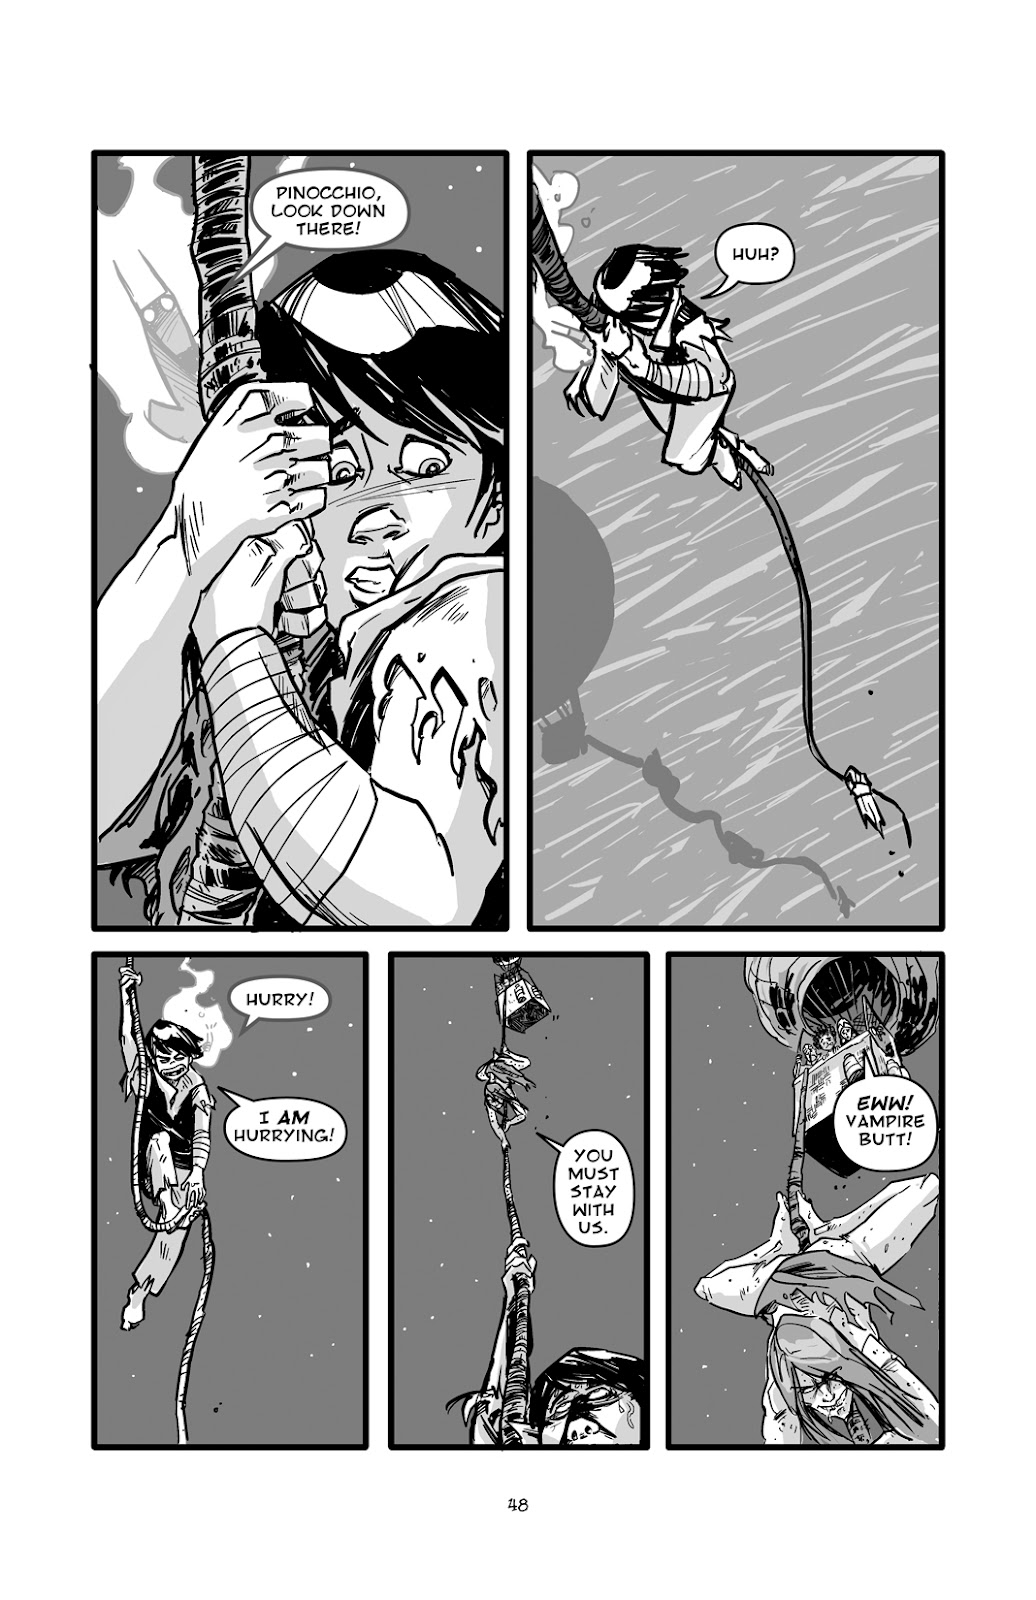 Pinocchio: Vampire Slayer - Of Wood and Blood issue 2 - Page 22